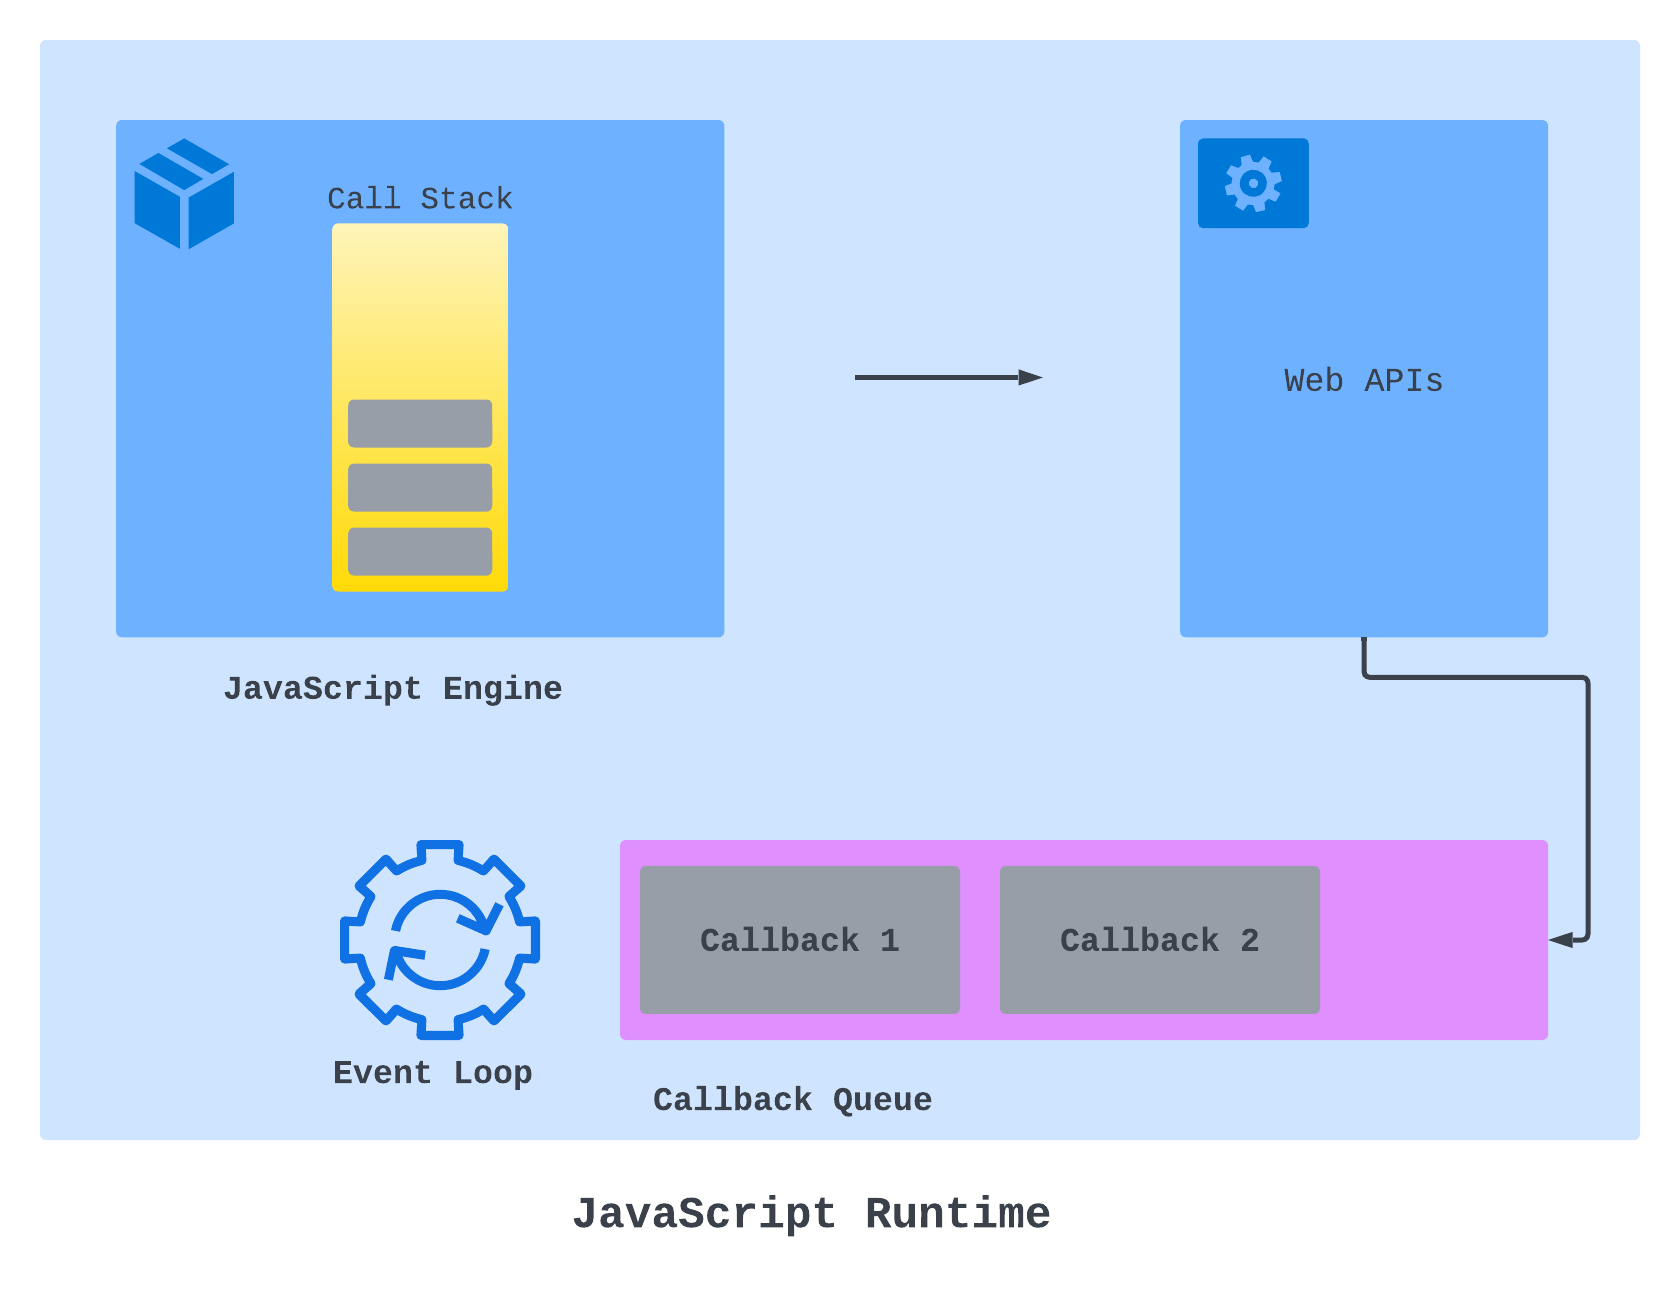 The Event Loop in the JavaScript Runtime